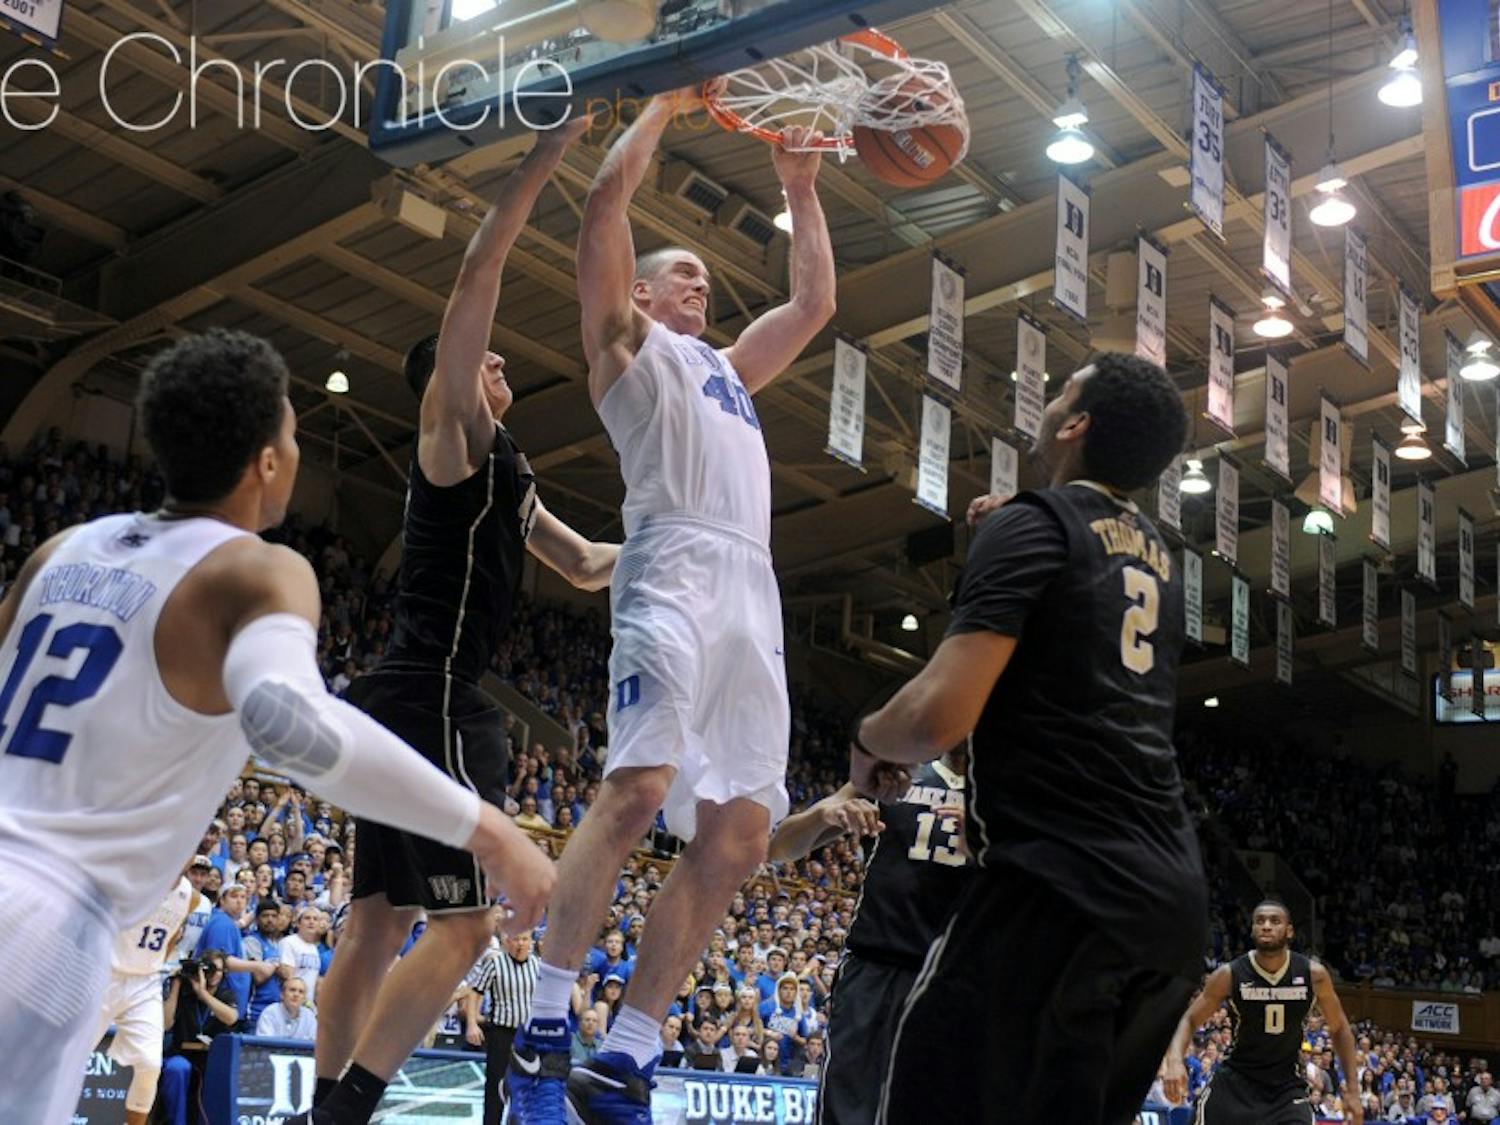 Center Marshall Plumlee’s Blue Devil career came to an end in the Sweet 16 last week, but he and his brothers provided several memorable moments in Cameron Indoor Stadium.